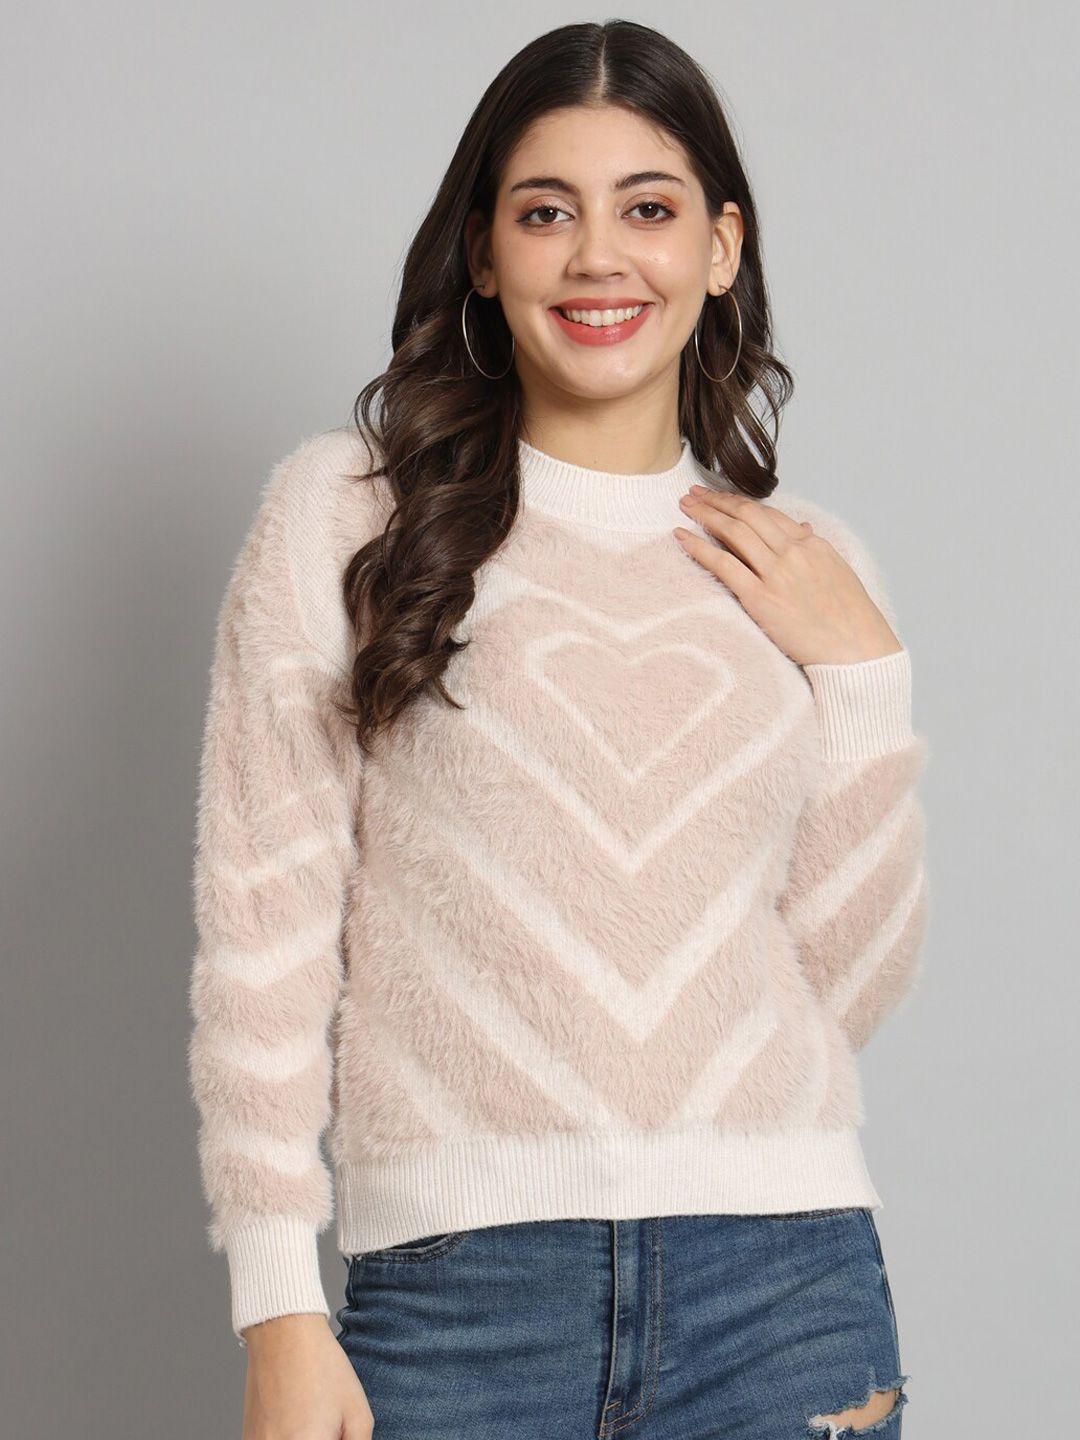 chemistry-quirky-fuzzy-self-design-woolen-pullover-sweater